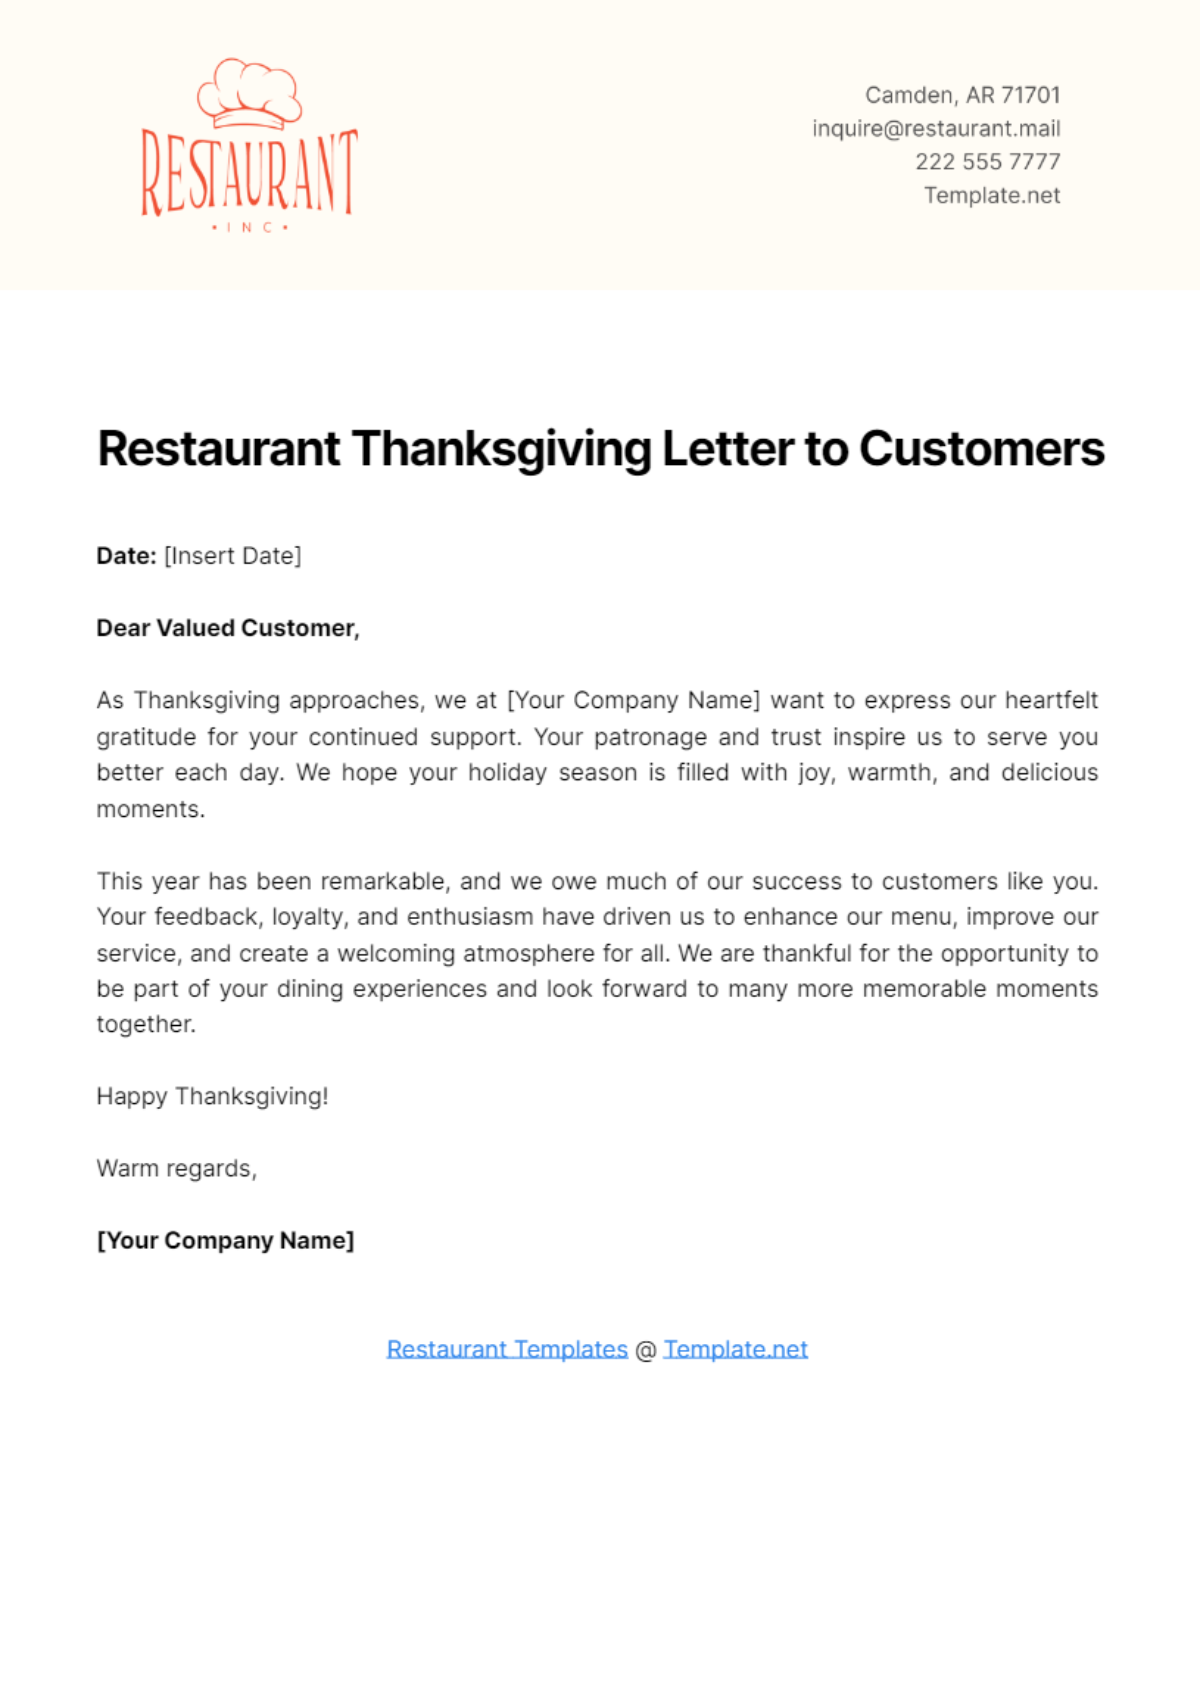 Free Restaurant Thanksgiving Letter to Customers Template